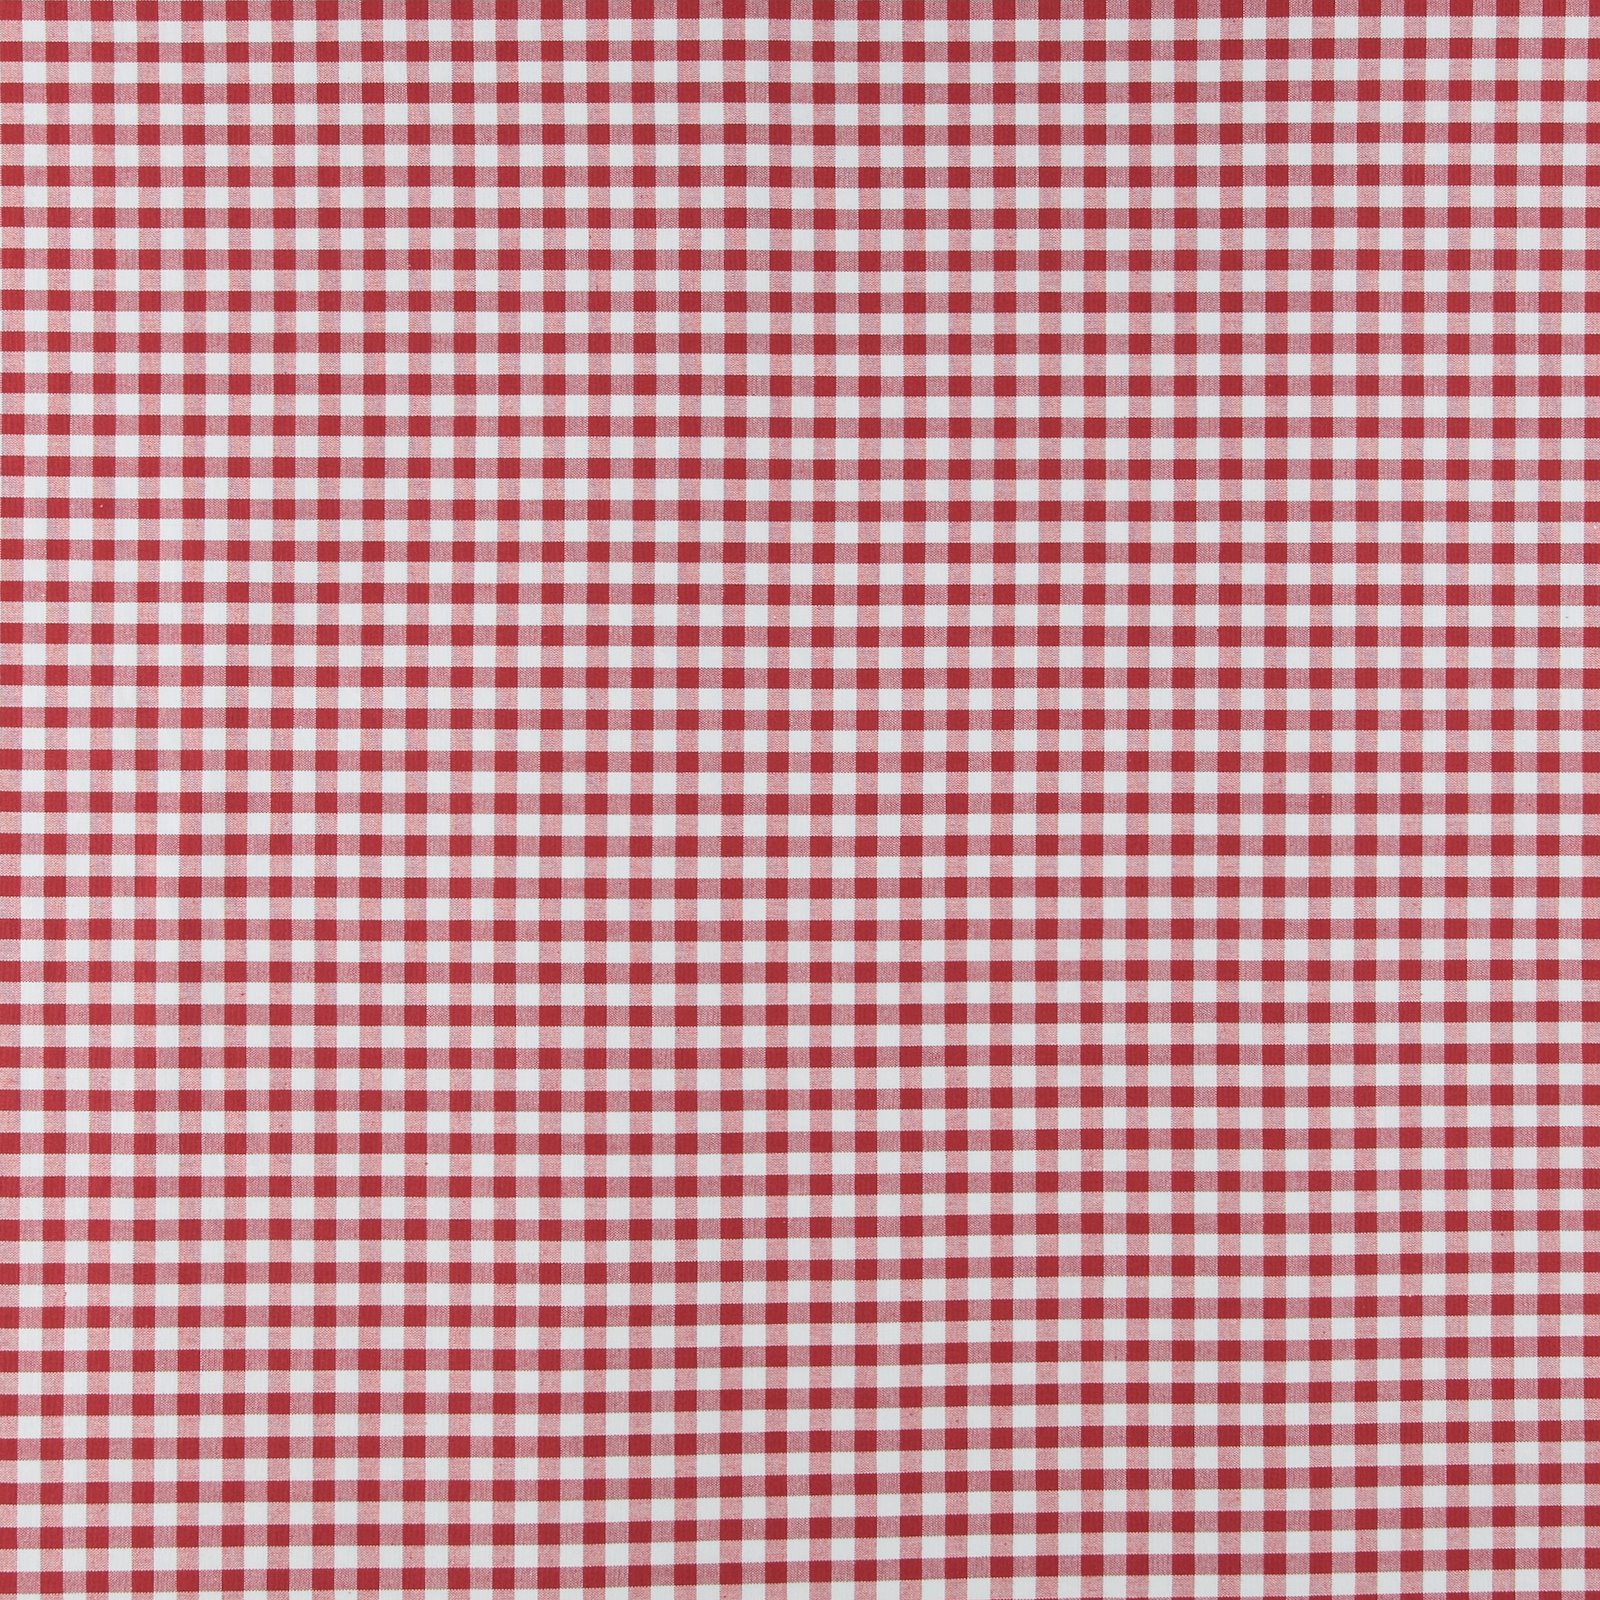 Cotton yarn dyed red/white check 810090_pack_sp